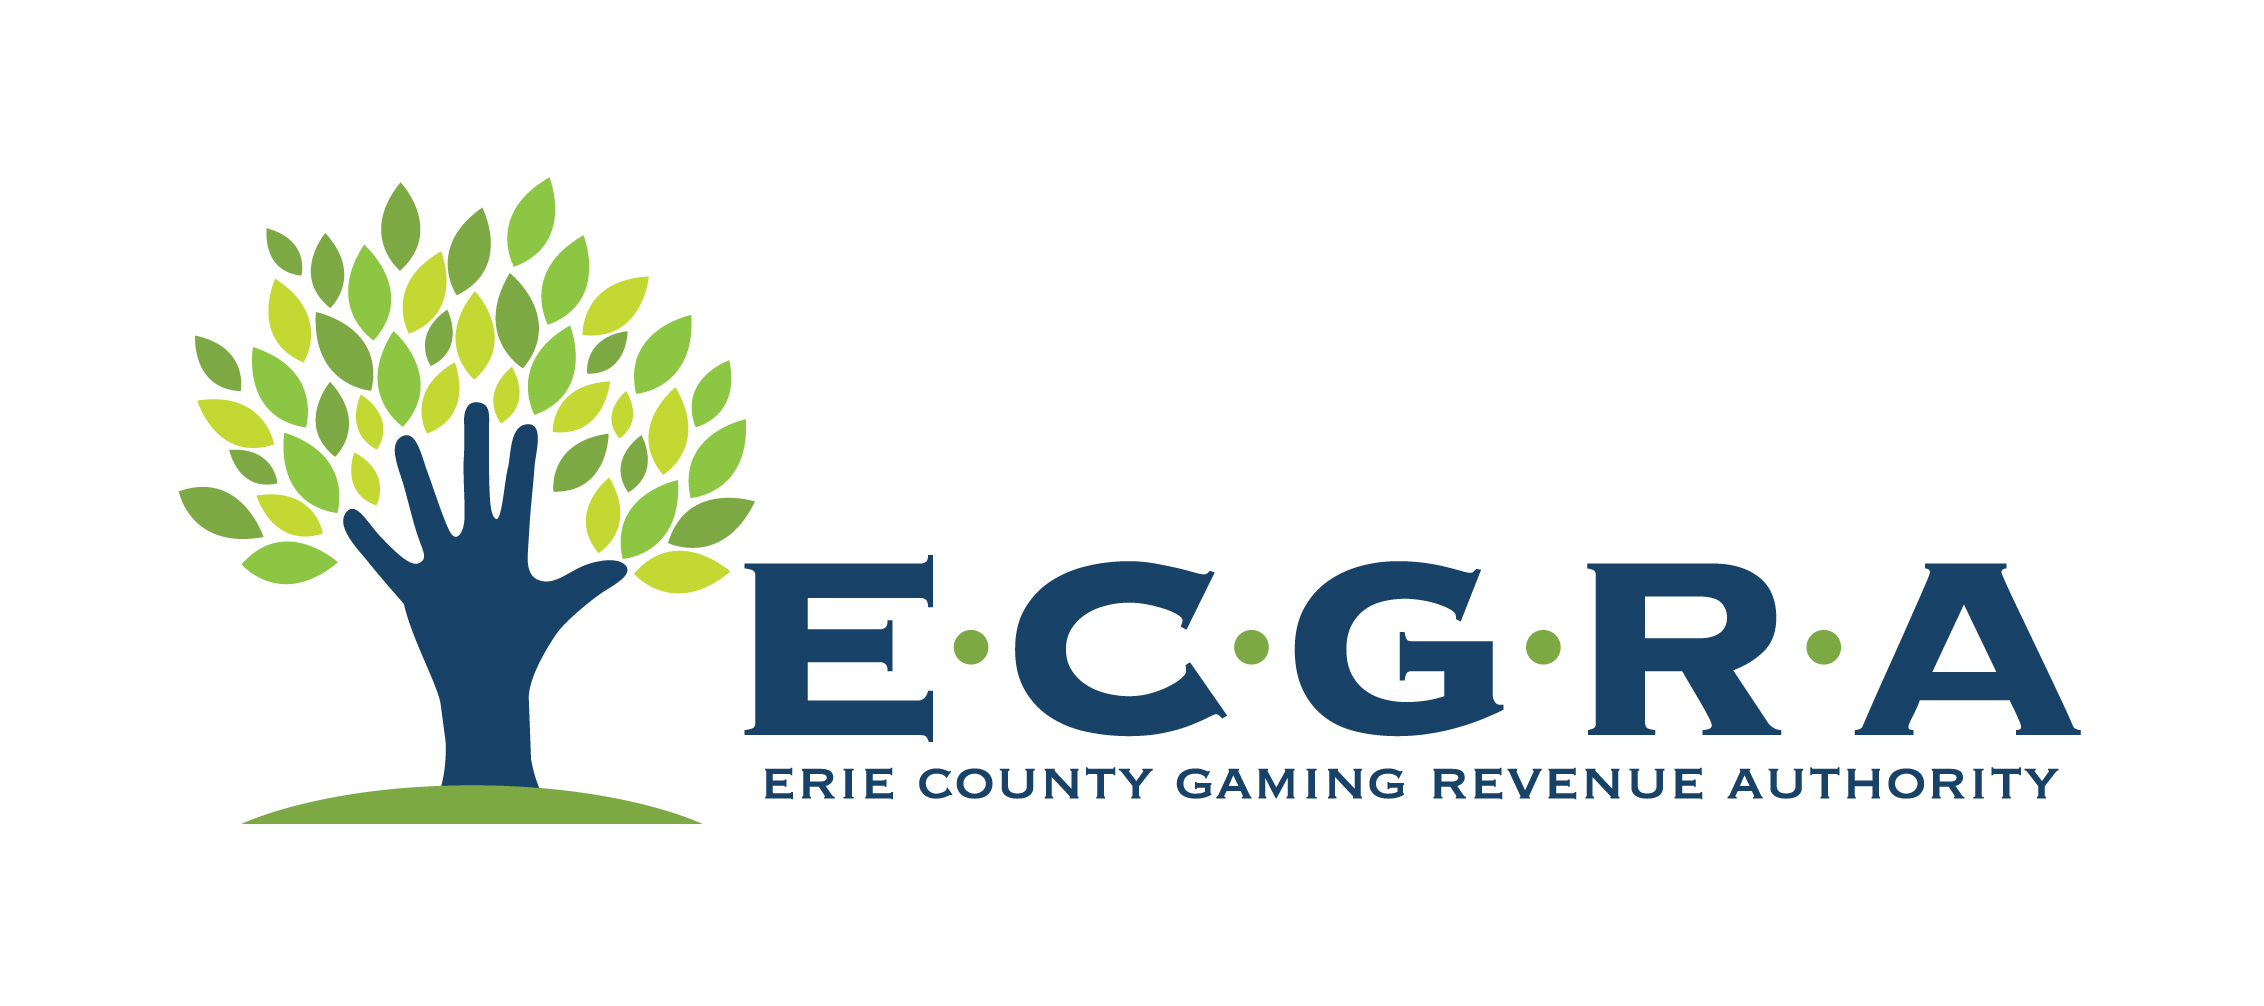 Erie County Gaming Revenue Authority